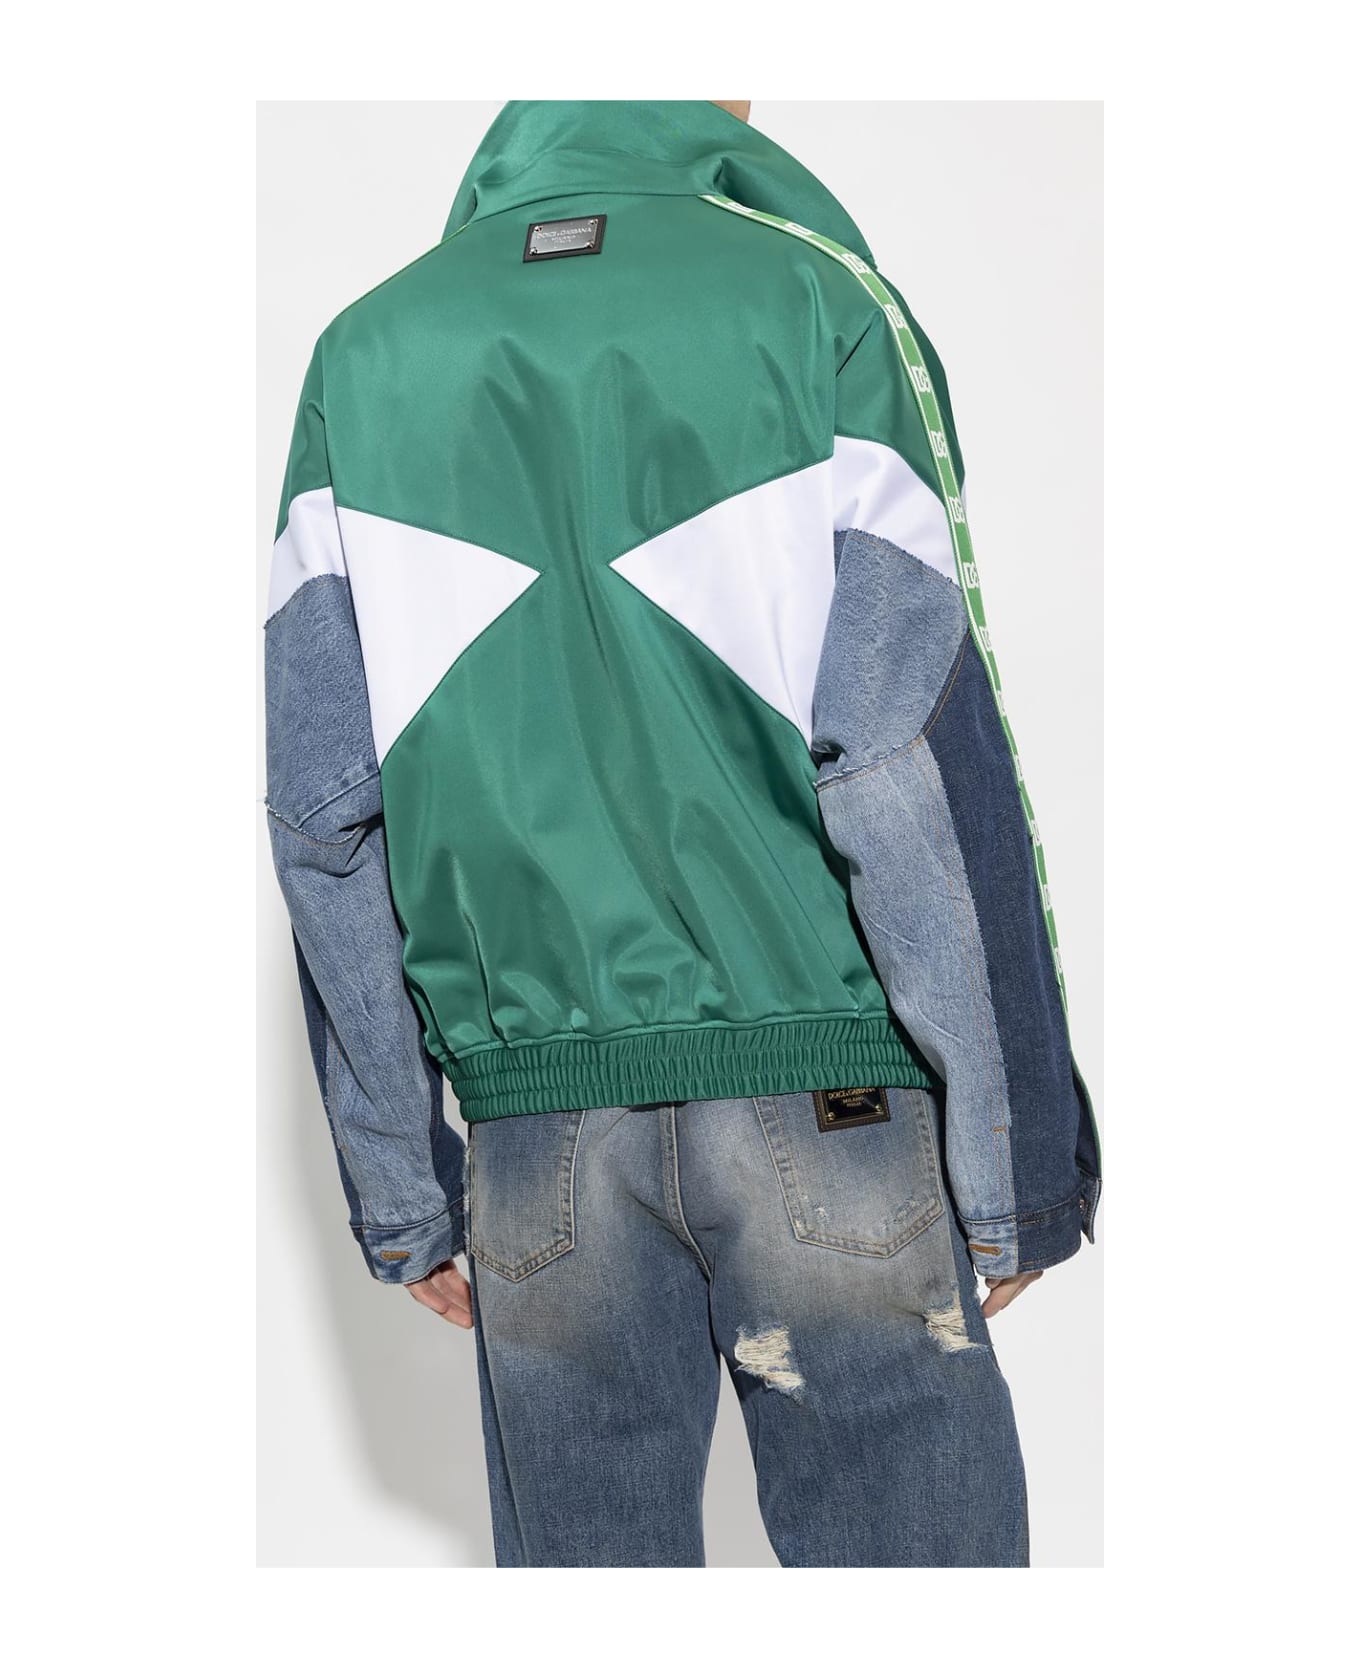 Dolce & Gabbana Patched Sweatshirt - Green, multicolor